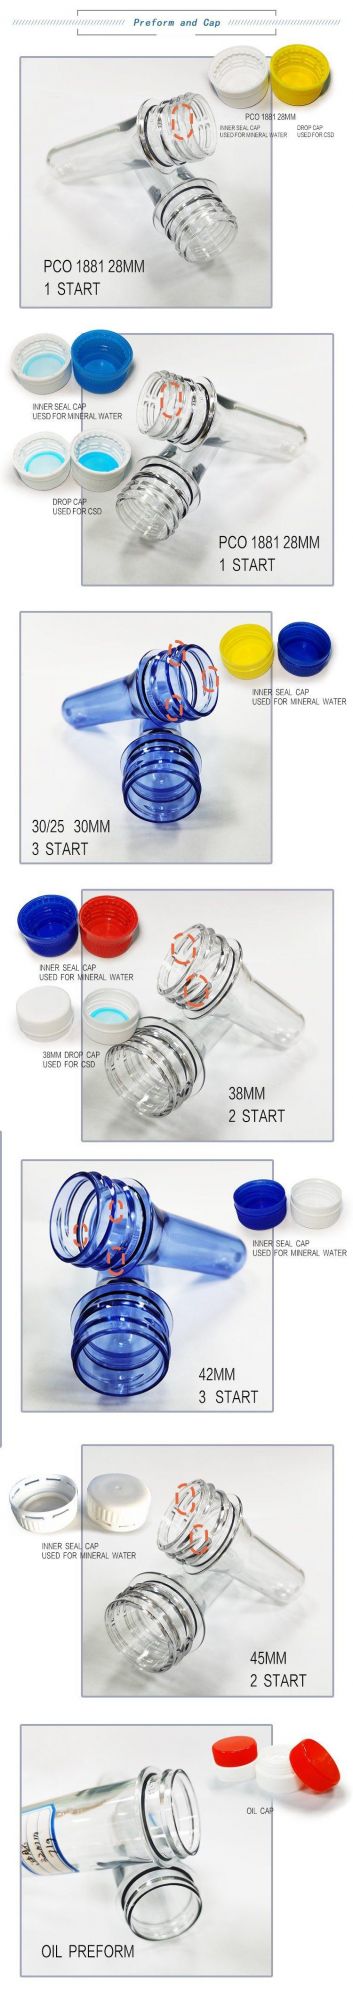 China Manufacture High Quality 14G 18g 20g 28g Water Bottle Preform Pet Bottle Preforms